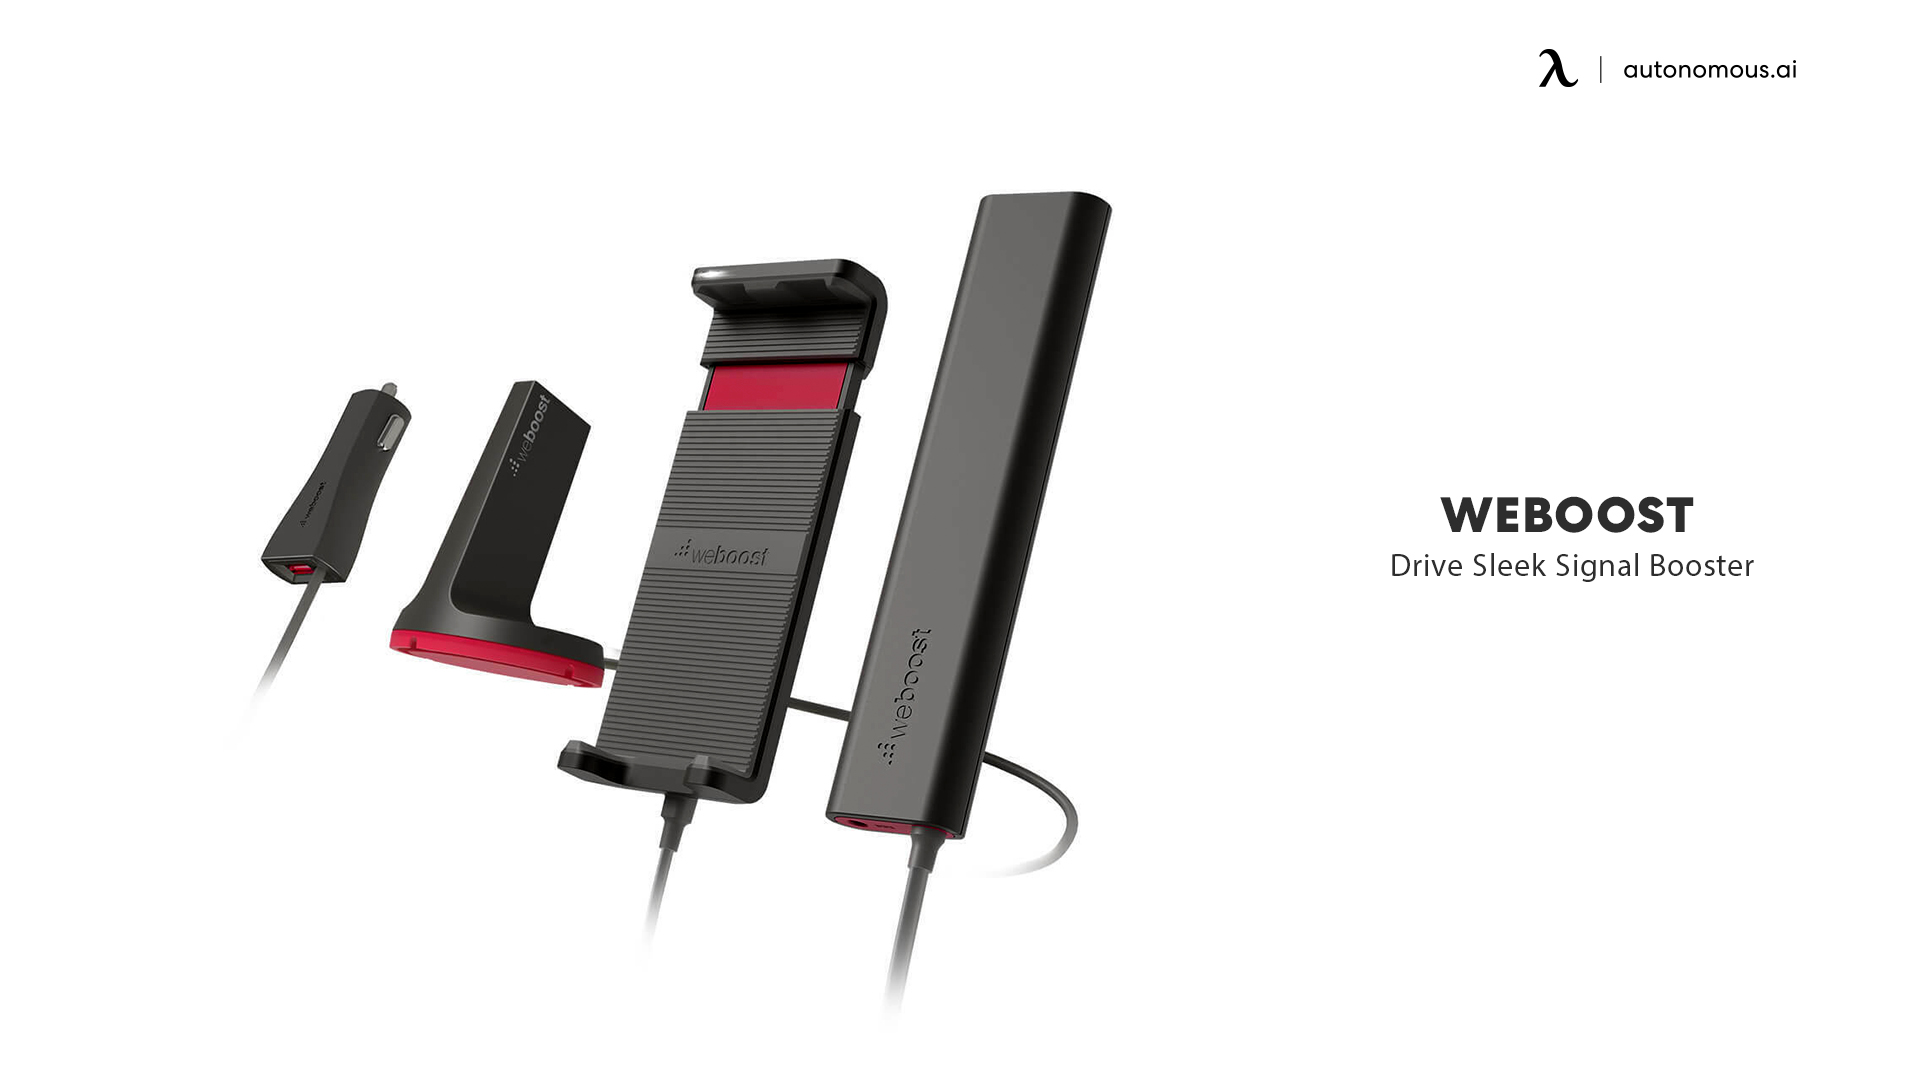 WeBoost Drive Sleek cell phone signal boosters